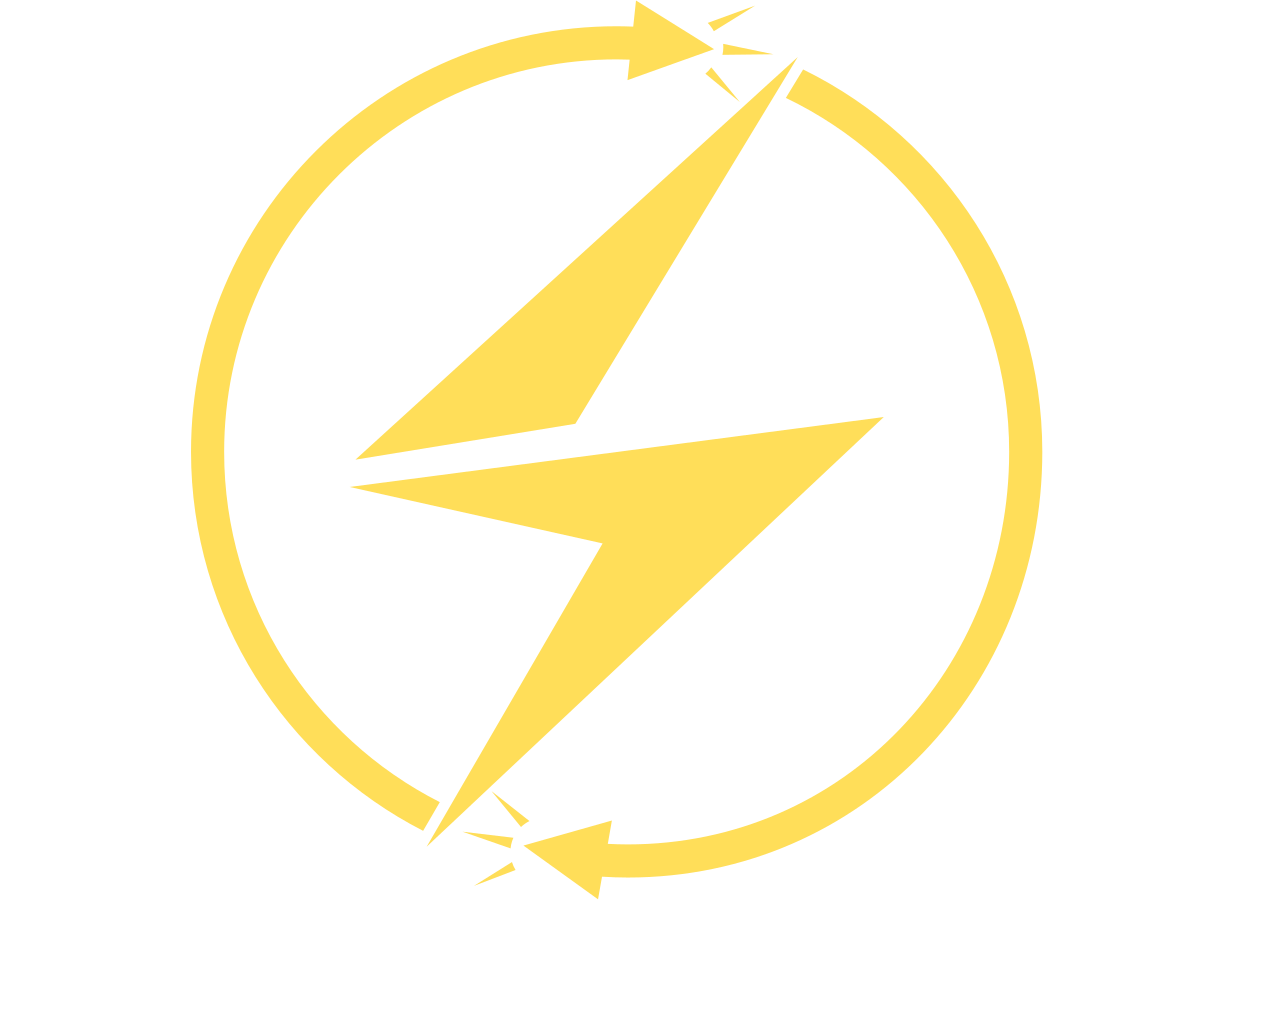 switch energy's web page